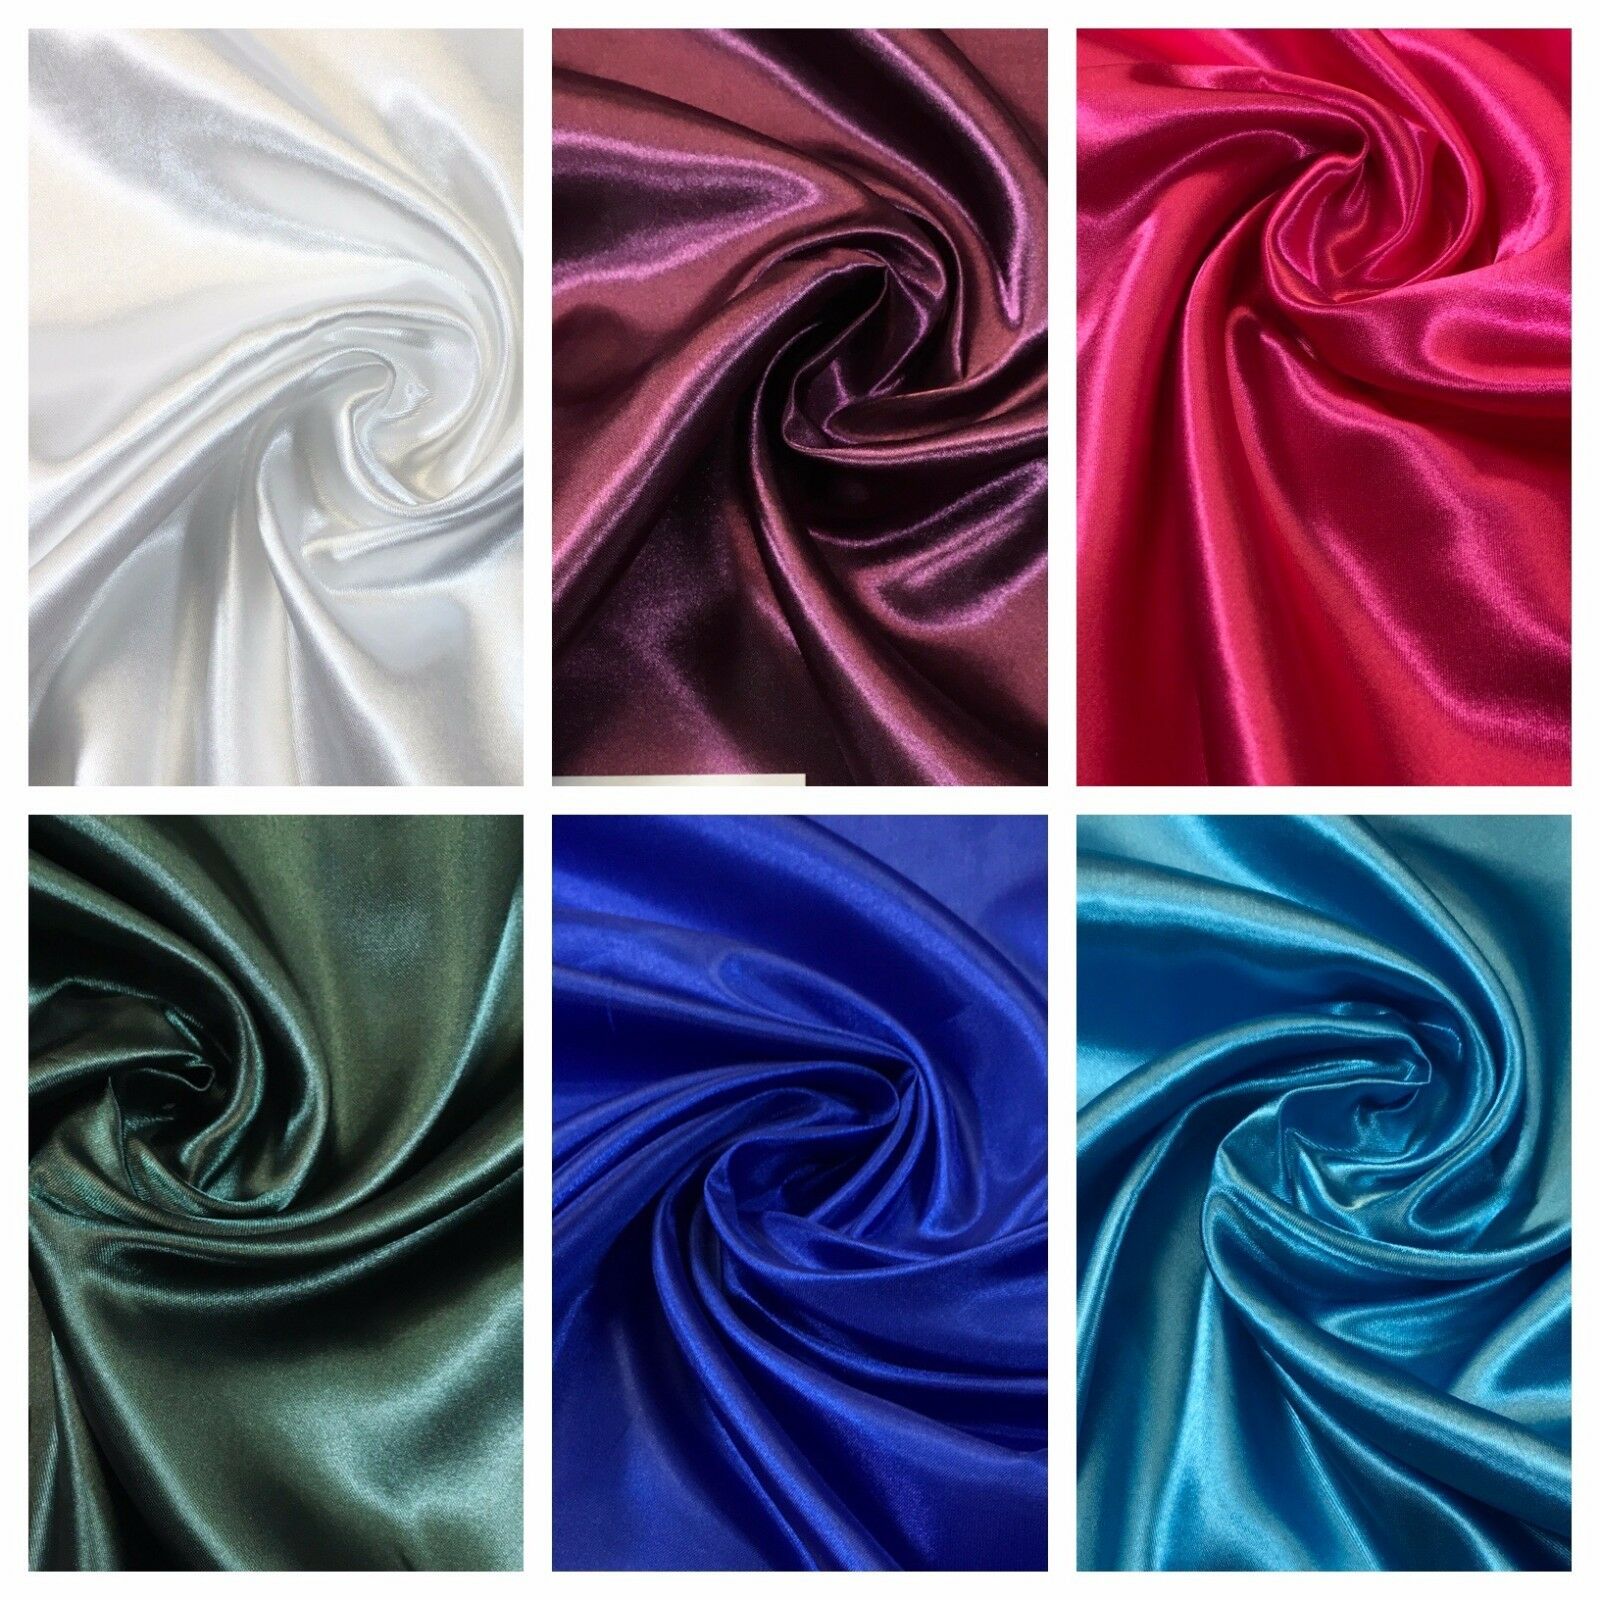 Smooth Silky Satin dressmaking fabric 60 inches wide M89 Mtex